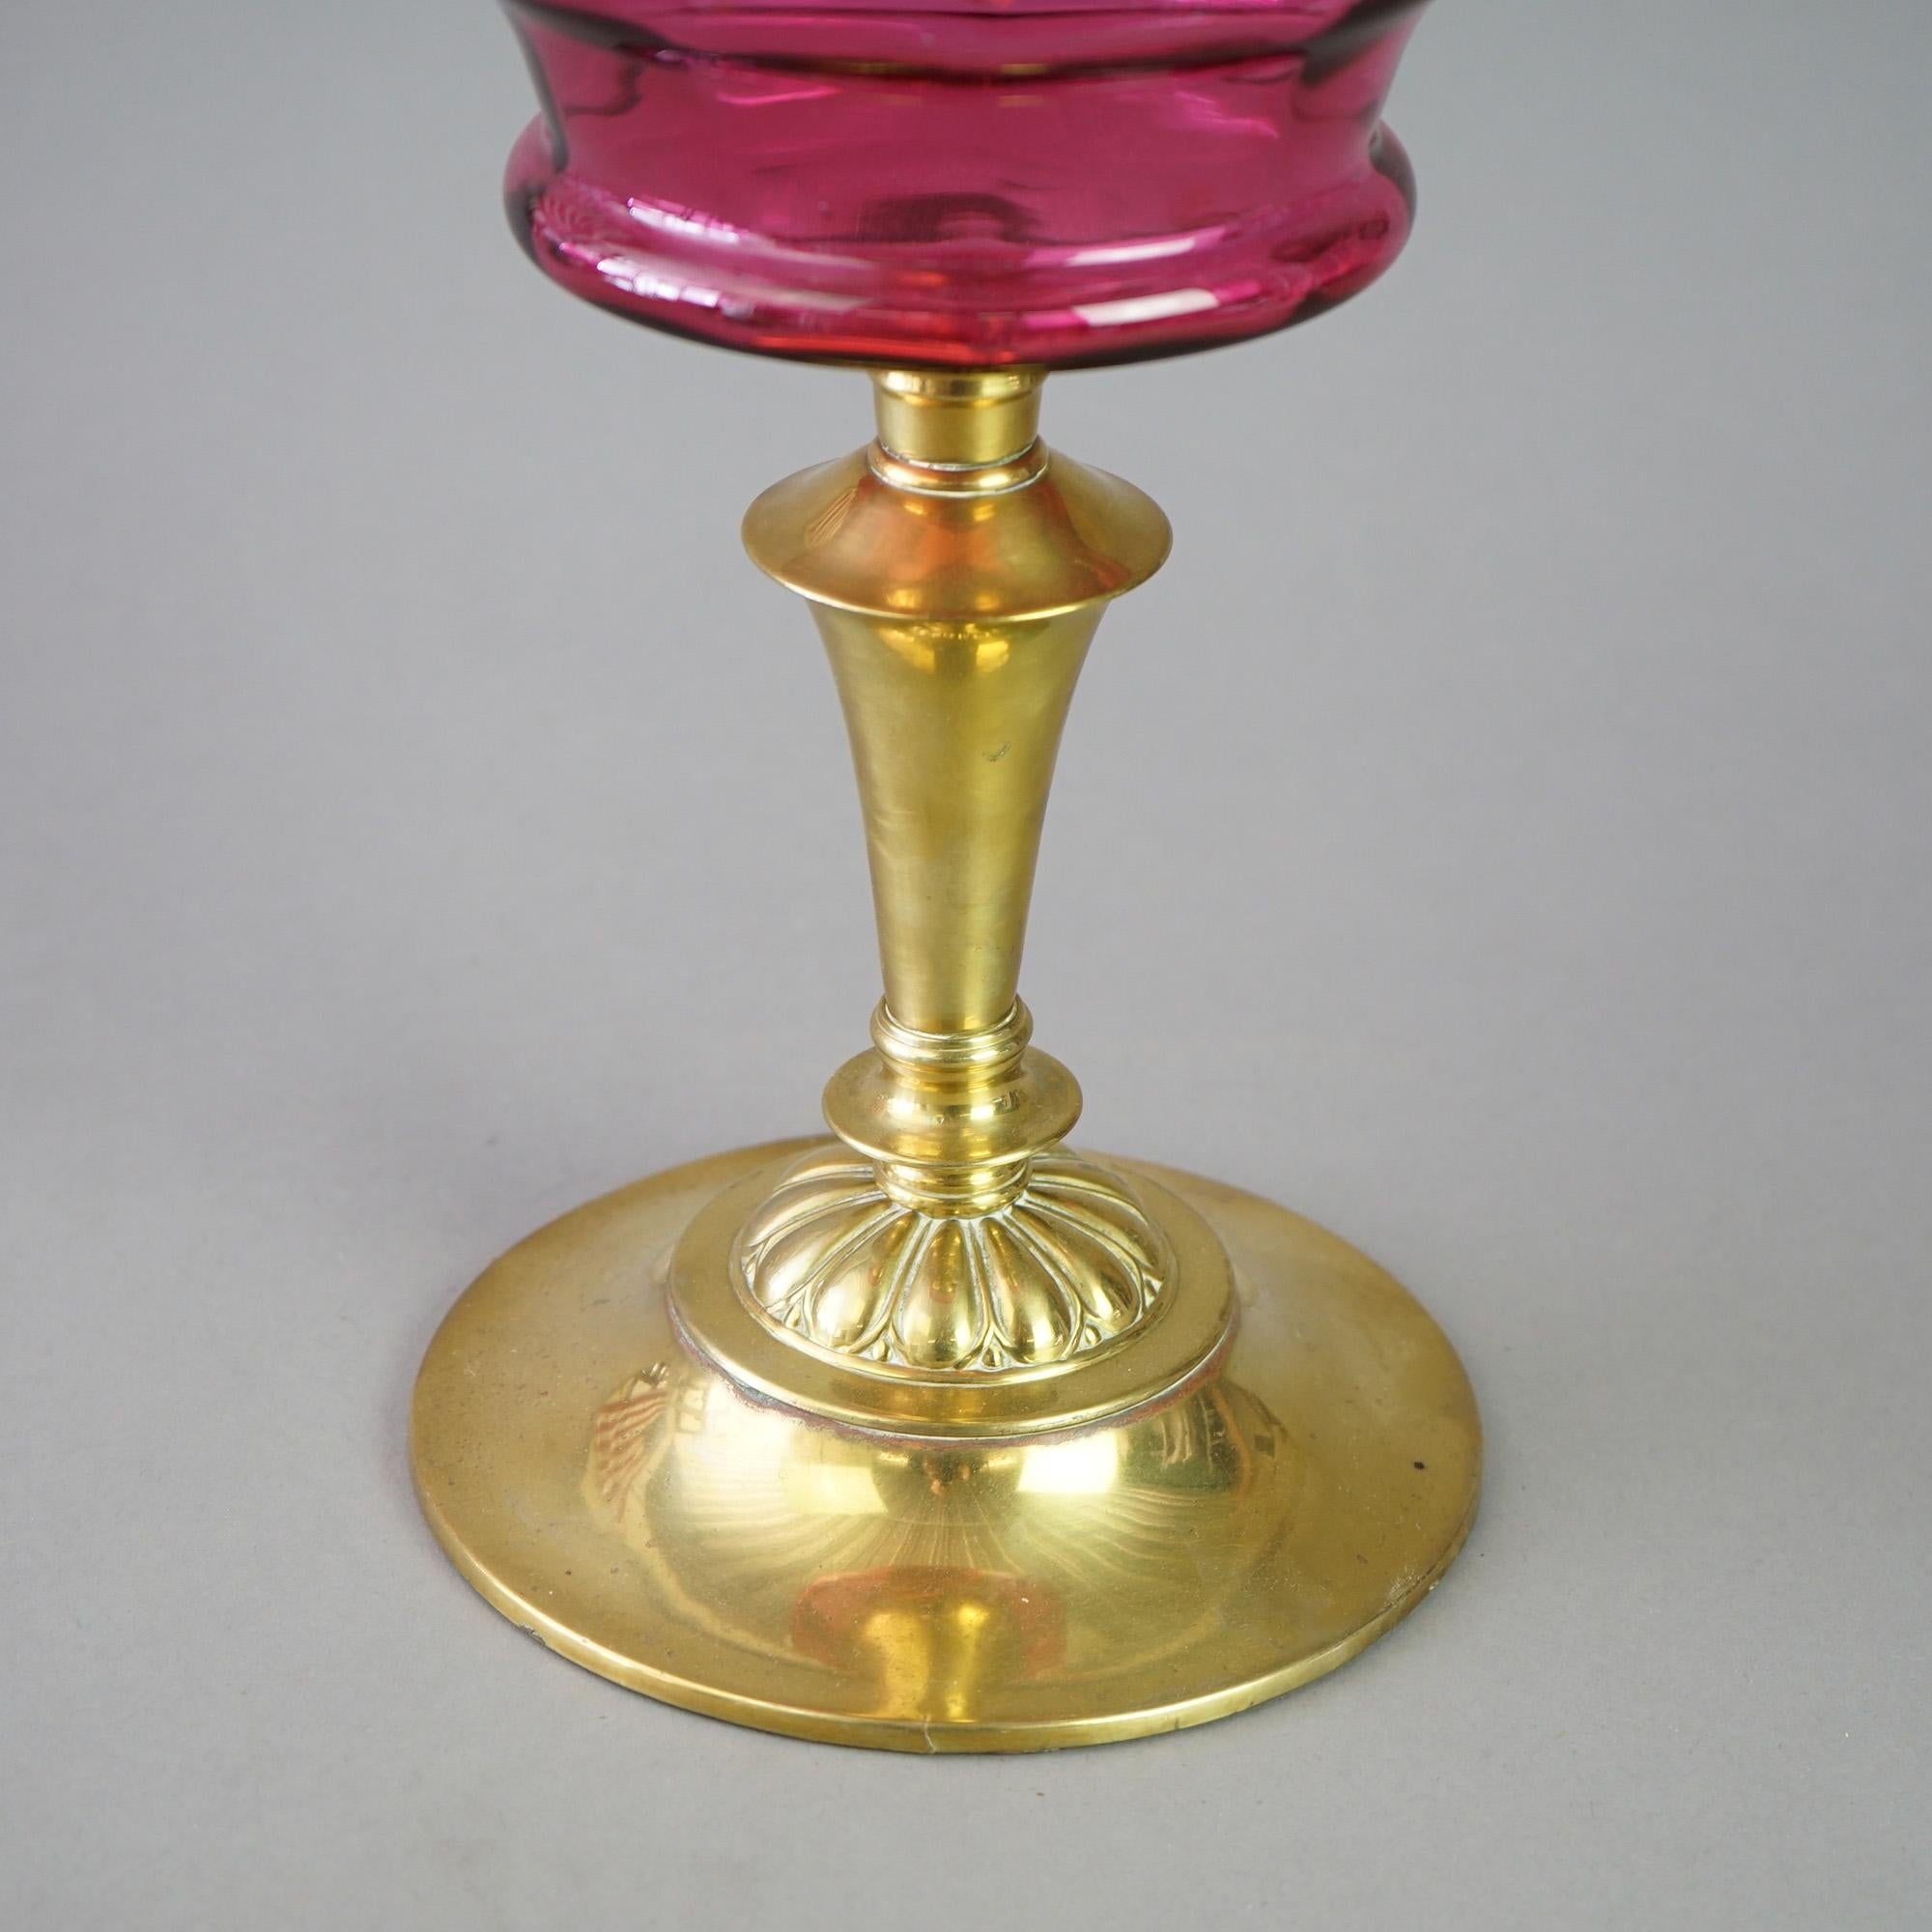 Antique Brass &Cranberry Glass “Gone With The Wind” Oil Lamp C1890 For Sale 7